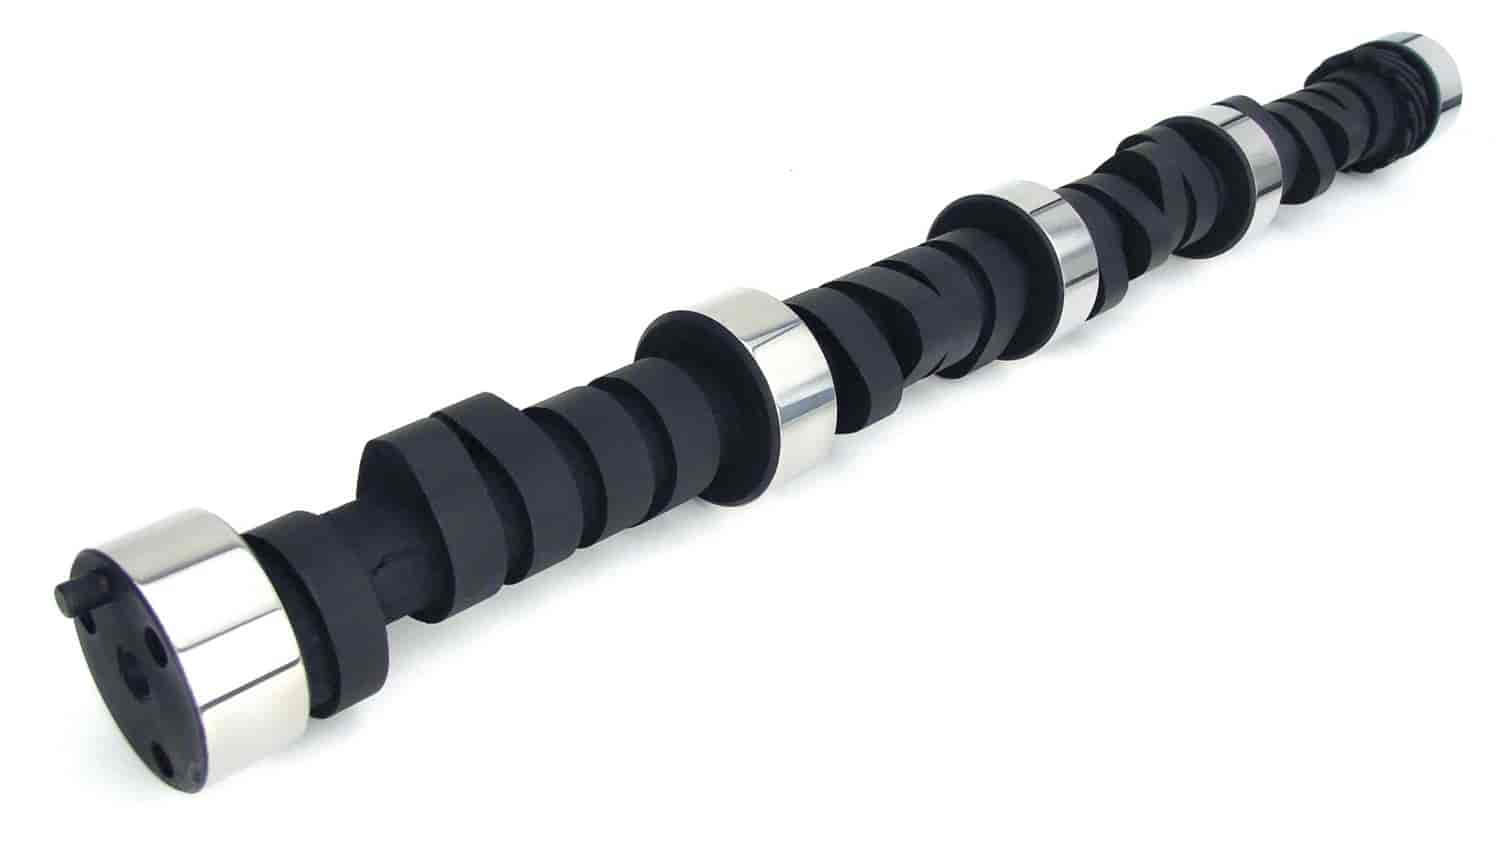 Xtreme Energy XE274H Hydraulic Flat Tappet Camshaft Only Lift: .490" /.490" Duration: 274°/286° RPM Range: 1800-6000